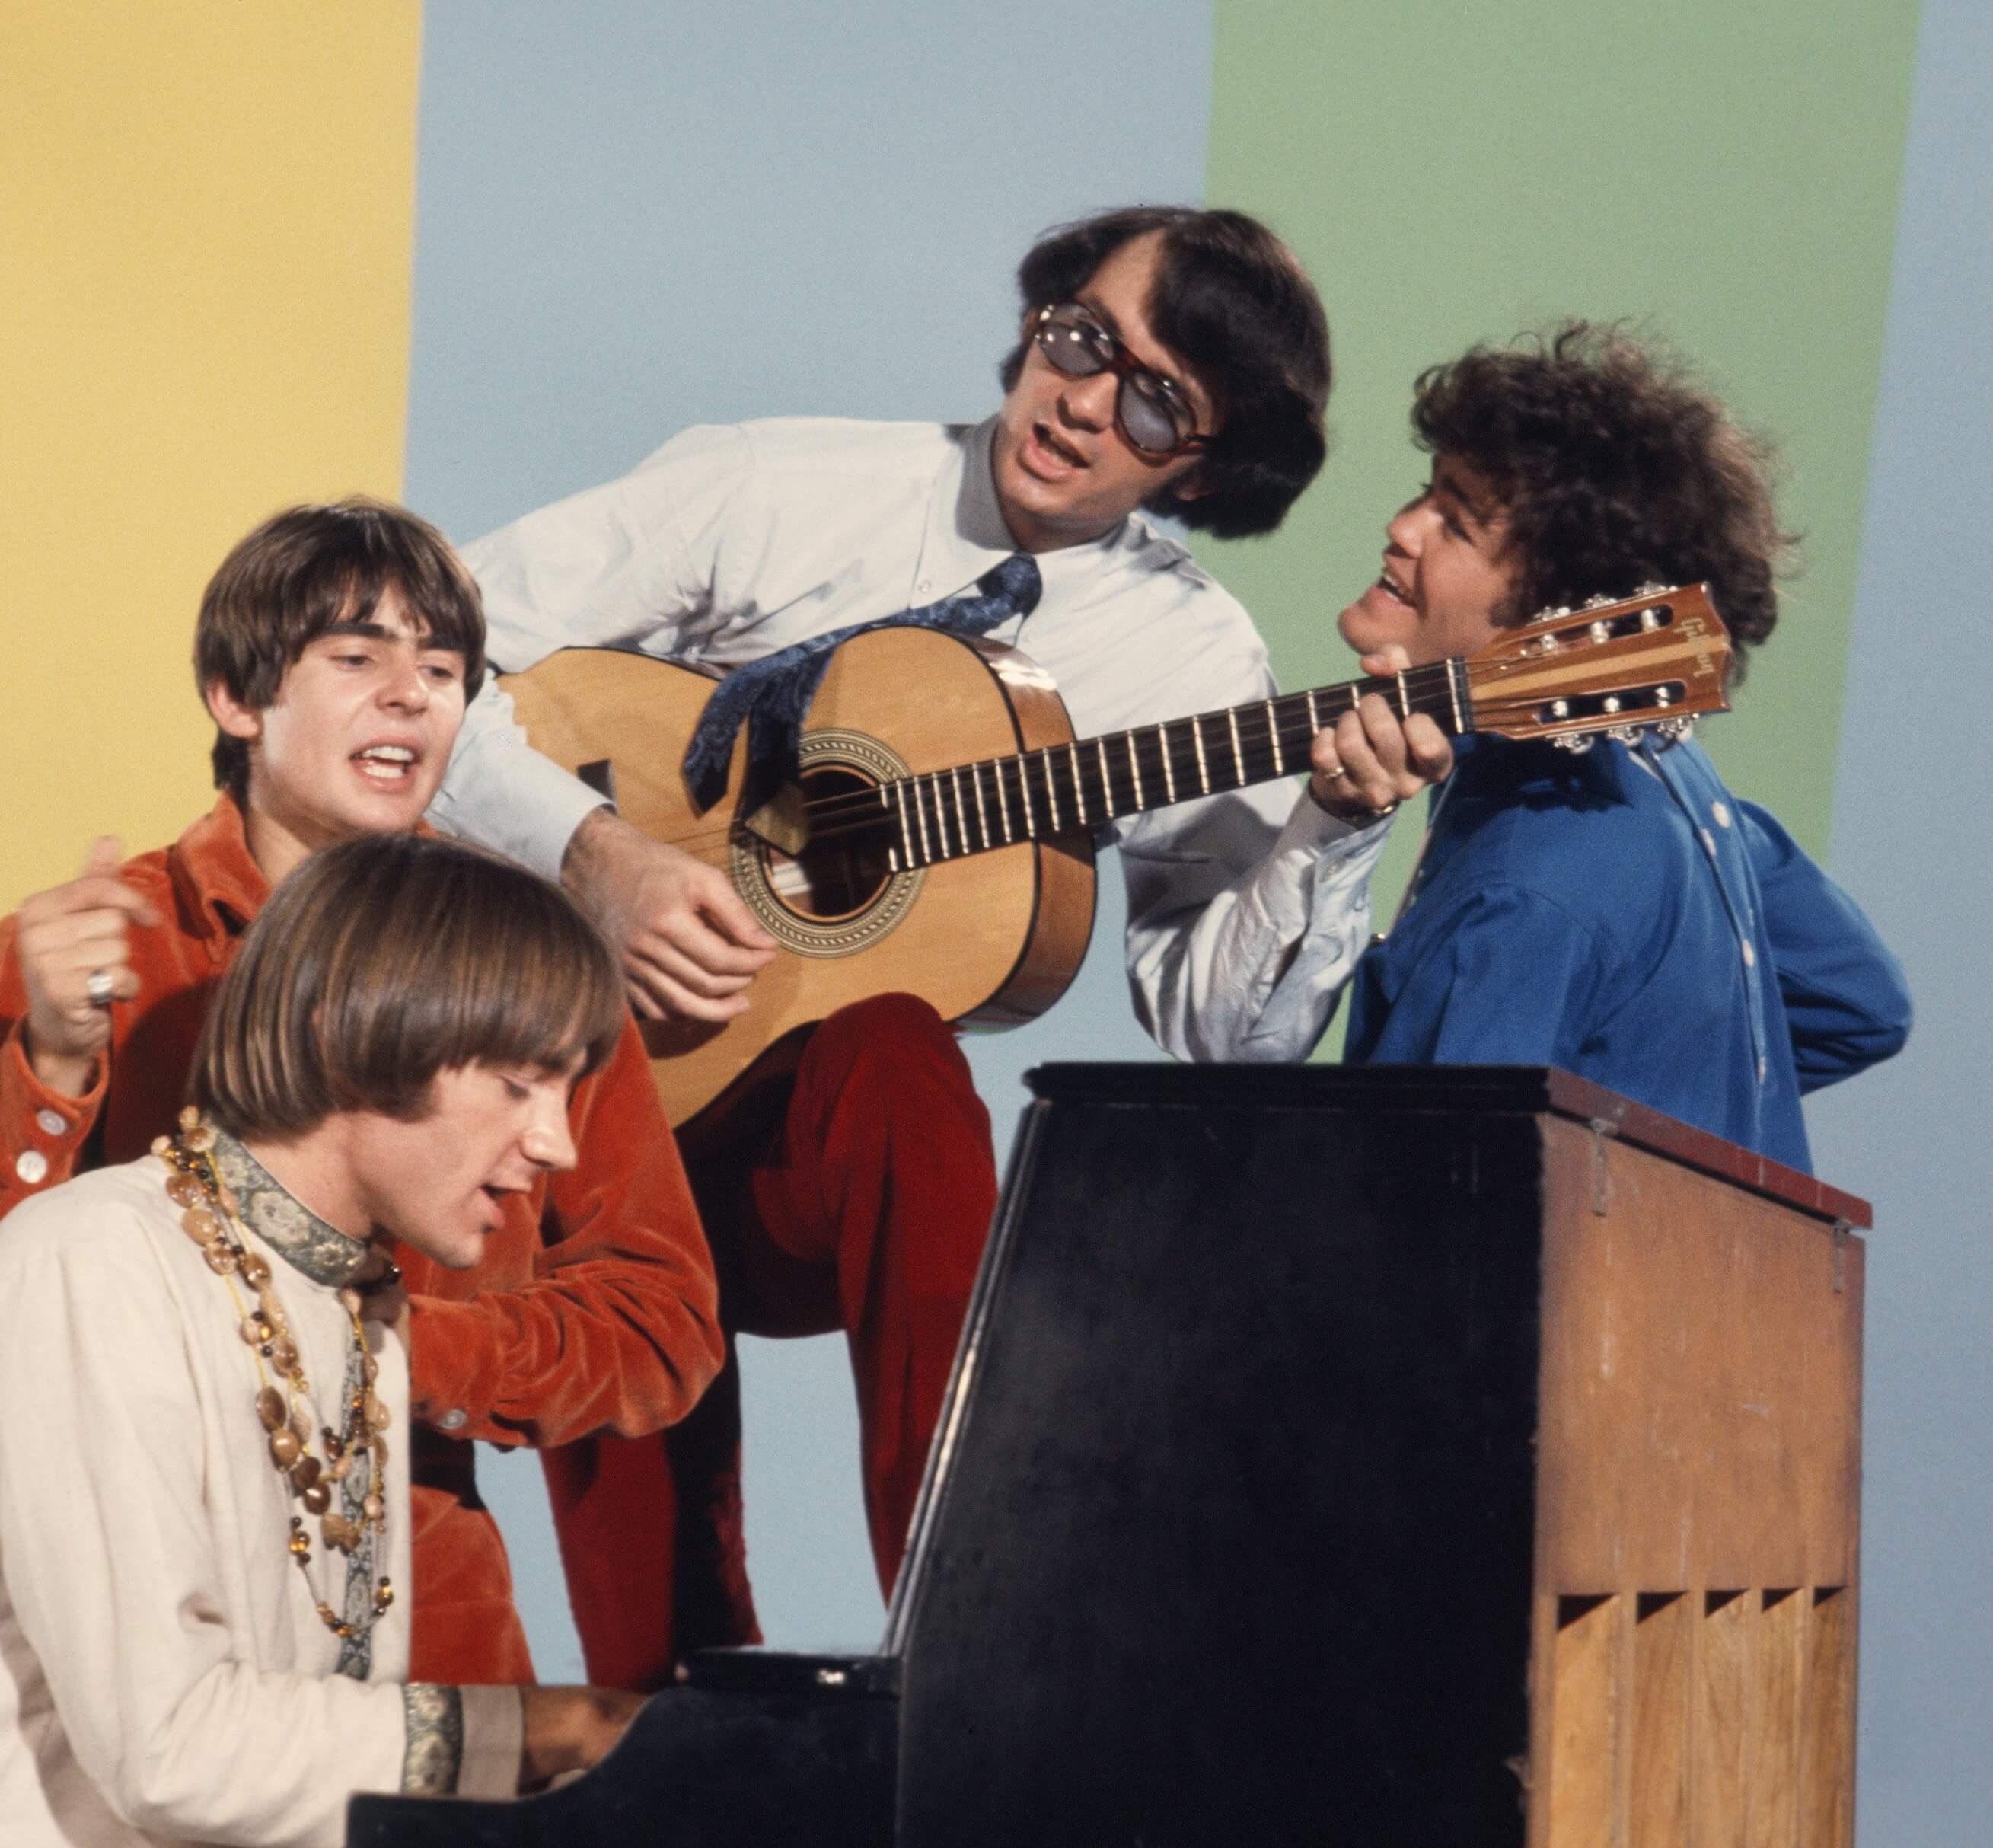 The Monkees at a piano